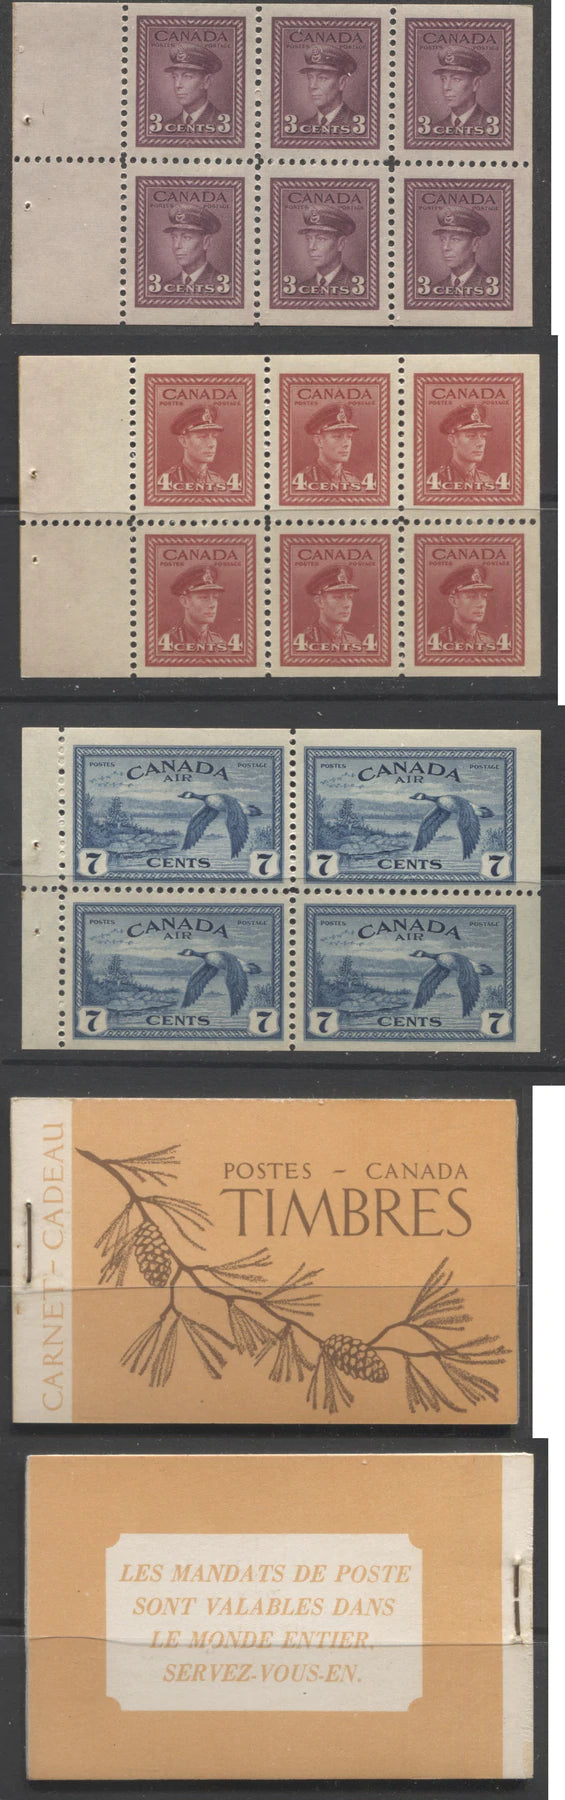 Lot 299 Canada #BK39a (McCann #39c) 1942-1949 War Issue Complete $1.00 French, Booklet Containing 1 Pane Each of 6 of 3c and 4c Plus 2 Panes of 4 7c Airmail Stamps, 12 mm Staple